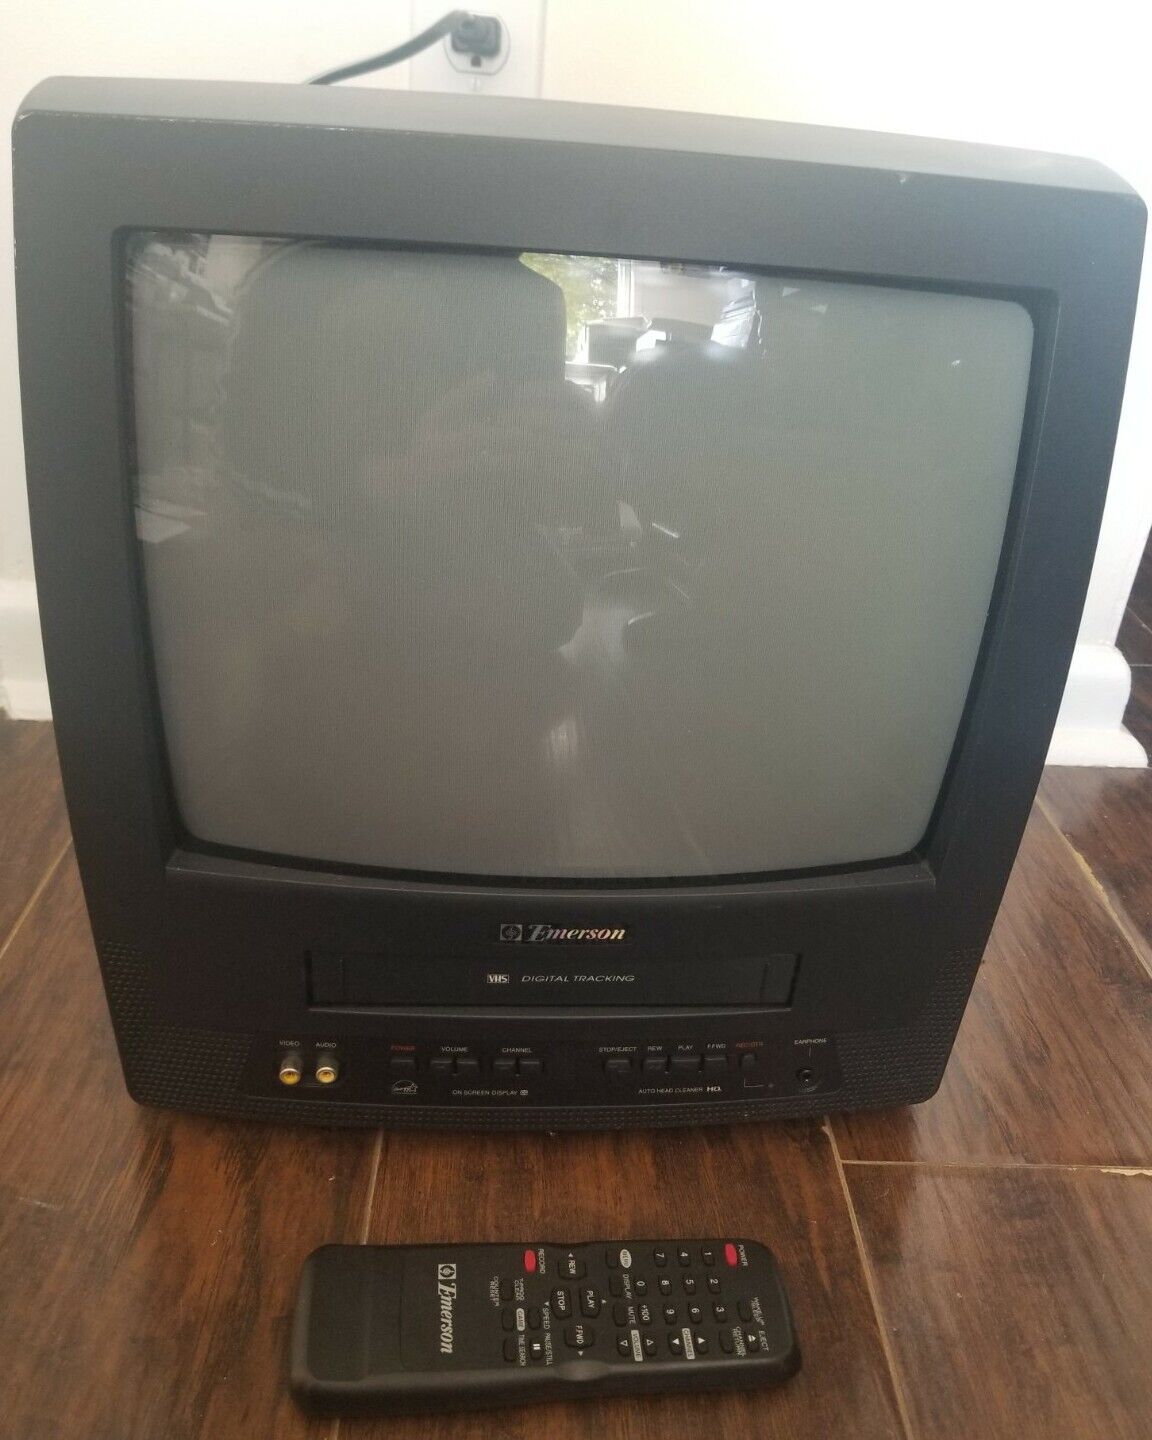 Emerson EWC1302 13” CRT TV VHS/VCR Combo + Remote  - **Tested & Works**